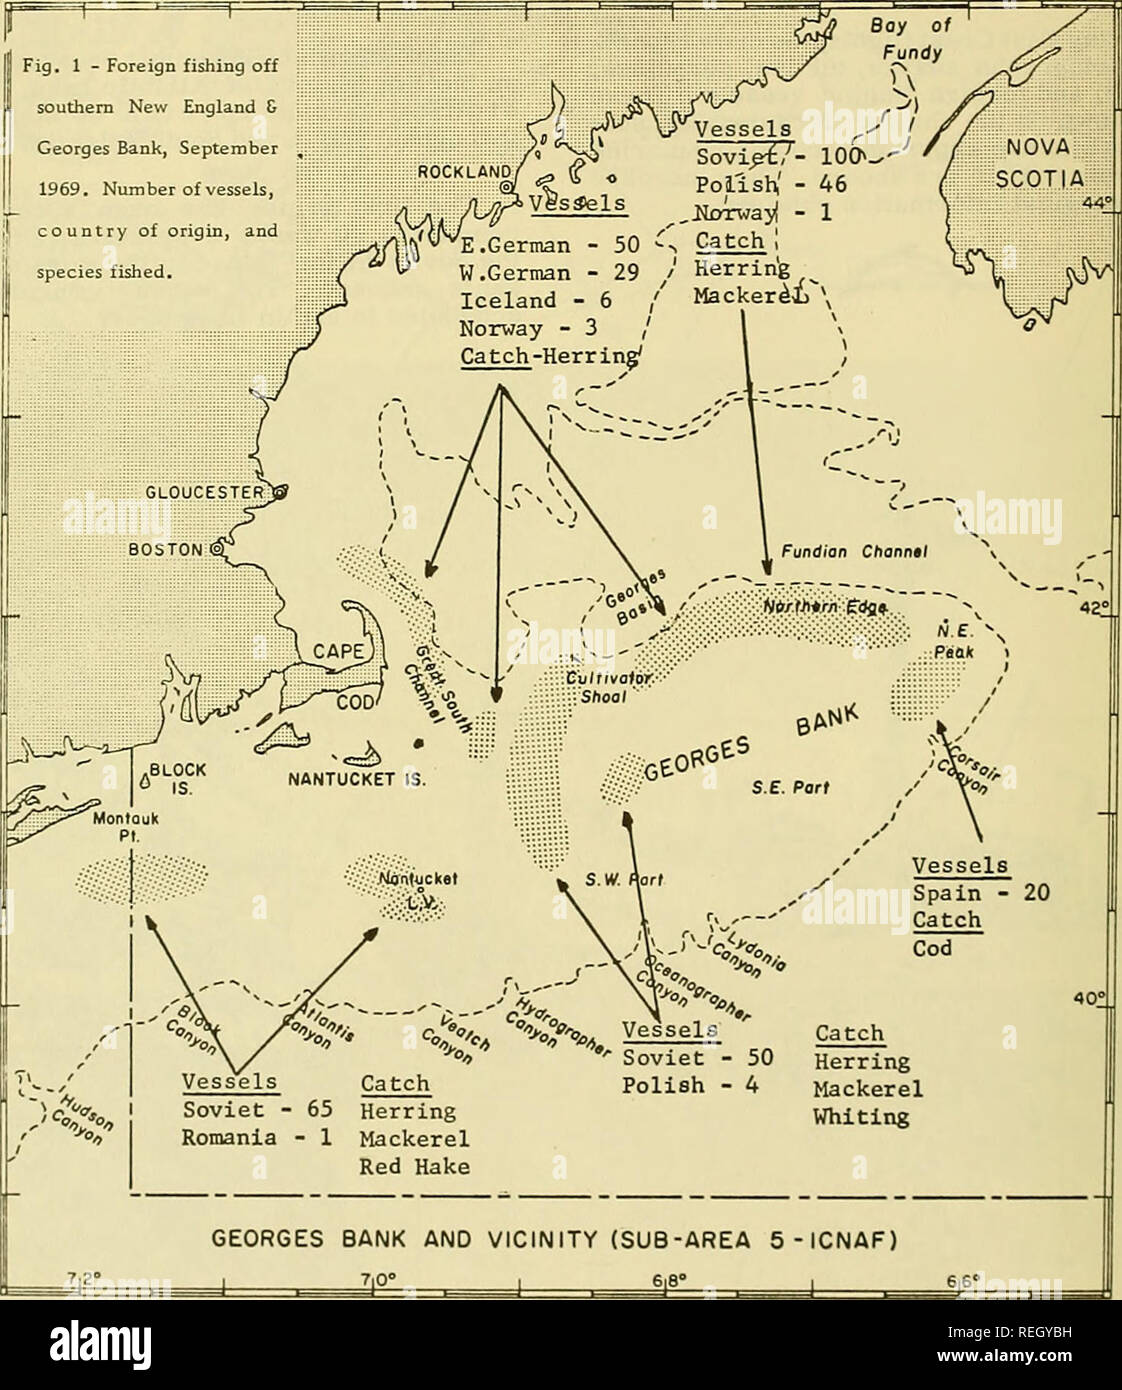 https://c8.alamy.com/comp/REGYBH/commercial-fisheries-review-fisheries-fish-trade-foreign-fishing-off-us-september-1969-generally-good-weather-permitted-excellent-coverage-of-the-northwest-atlantic-off-new-england-340-foreign-fishing-and-support-vessels-were-sighted325-sighted-in-august-fig-1-southern-new-england-amp-georges-bank-ussr-75-vessels-34-factory-stern-trawl-ers-126-medium-side-trawlers-6-factory-base-ships-8-refrigerated-transports-and-1-tanker-102-vessels-in-september-1968-catches-moderate-to-heavy-were-primarily-herring-and-mackerel-16-please-note-that-these-images-are-extracted-REGYBH.jpg